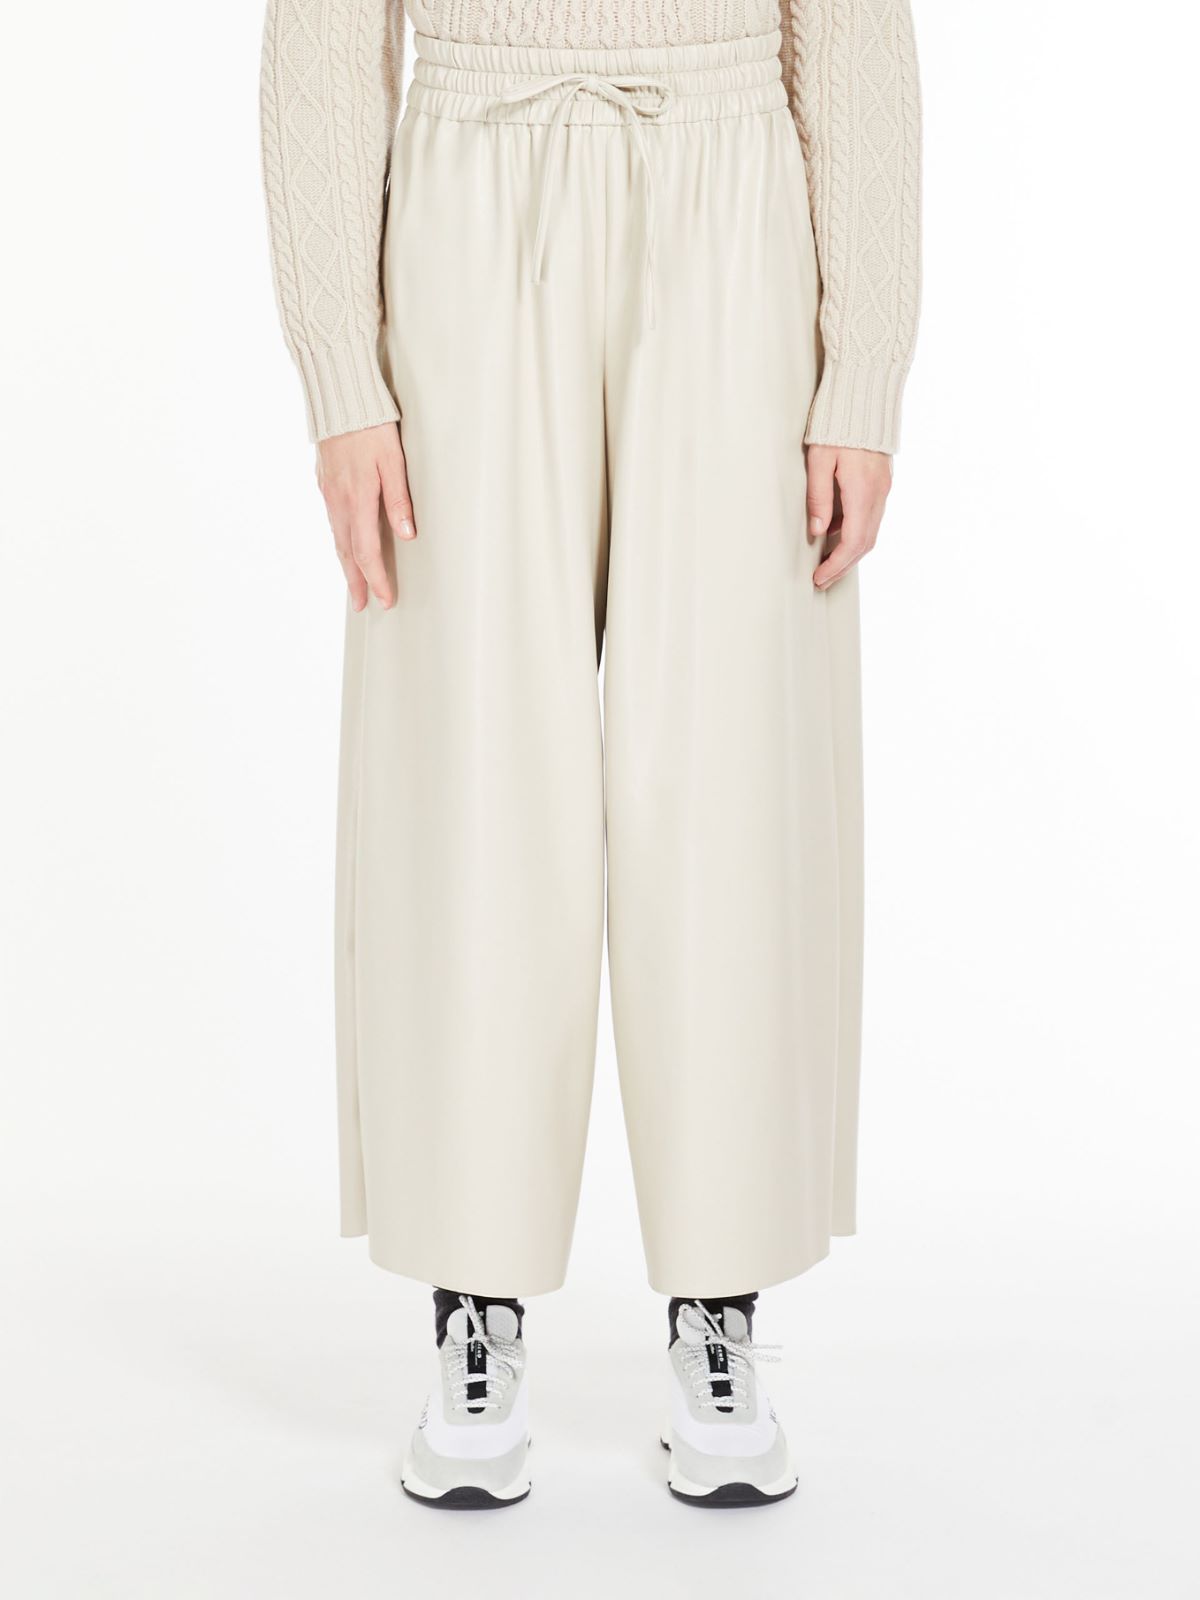 Coated jersey trousers - SAND - Weekend Max Mara - 2